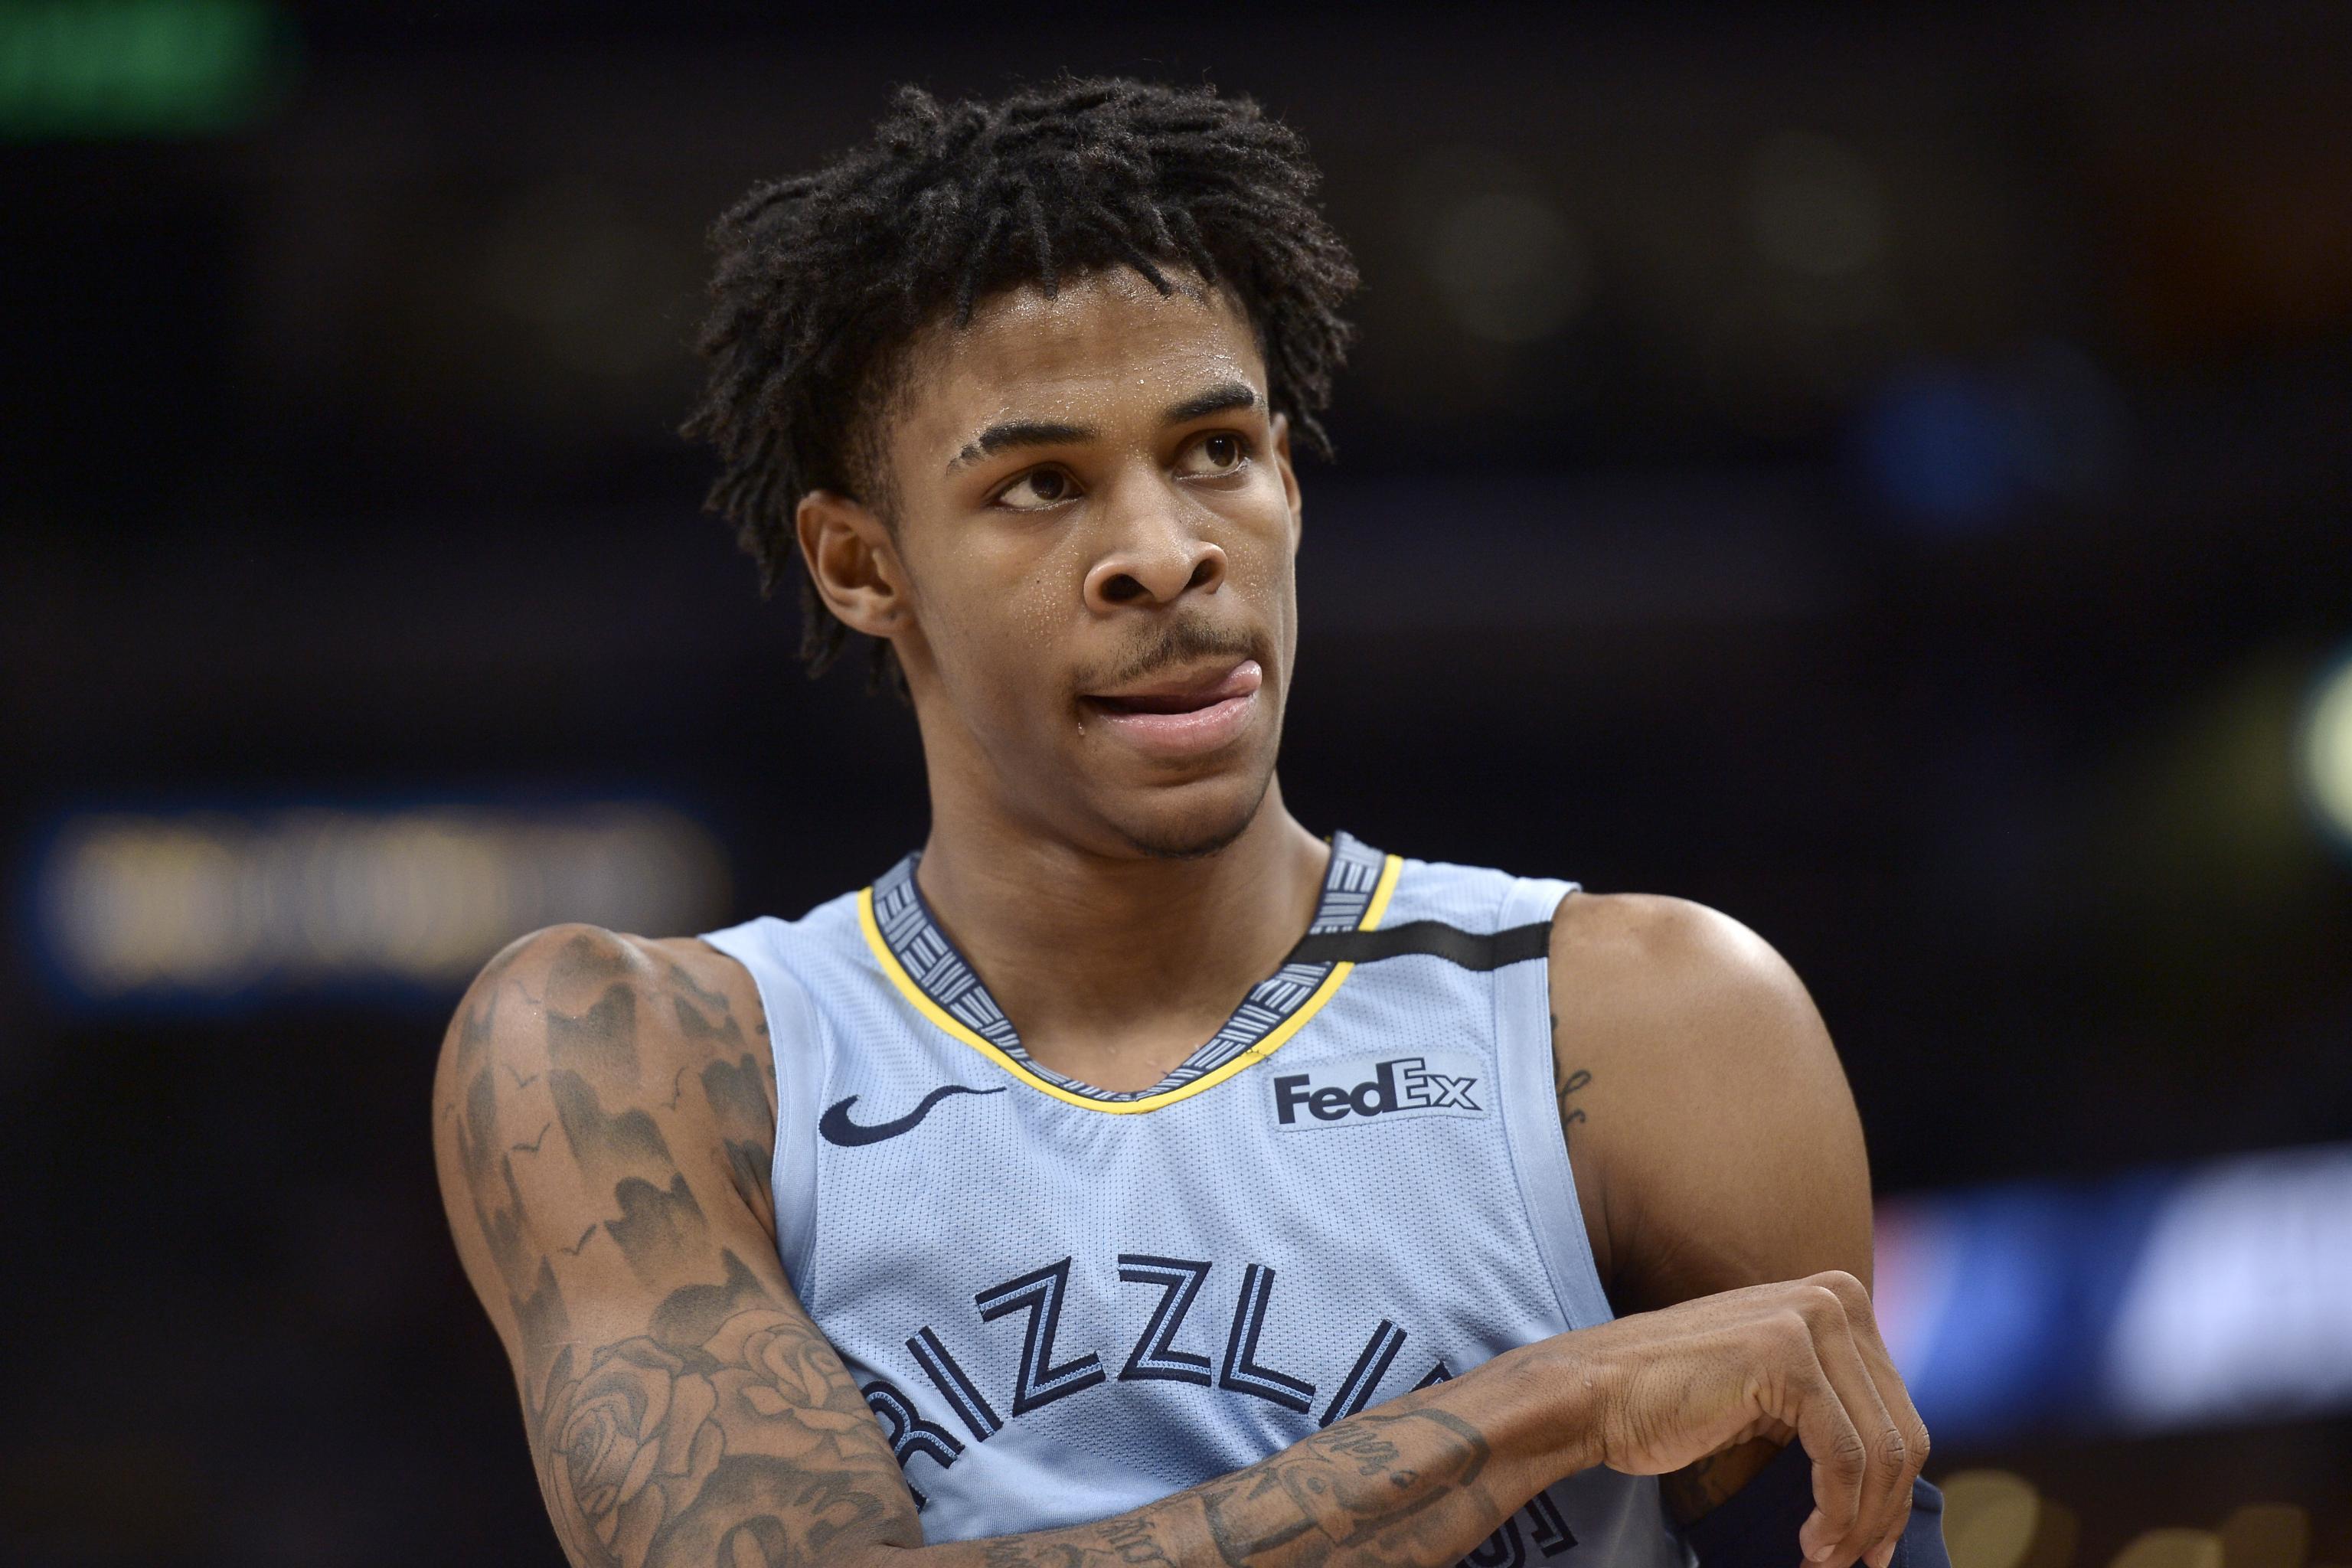 Ja Morant in Meme War With Steph Curry Over Andre Iguodala [UPDATE]